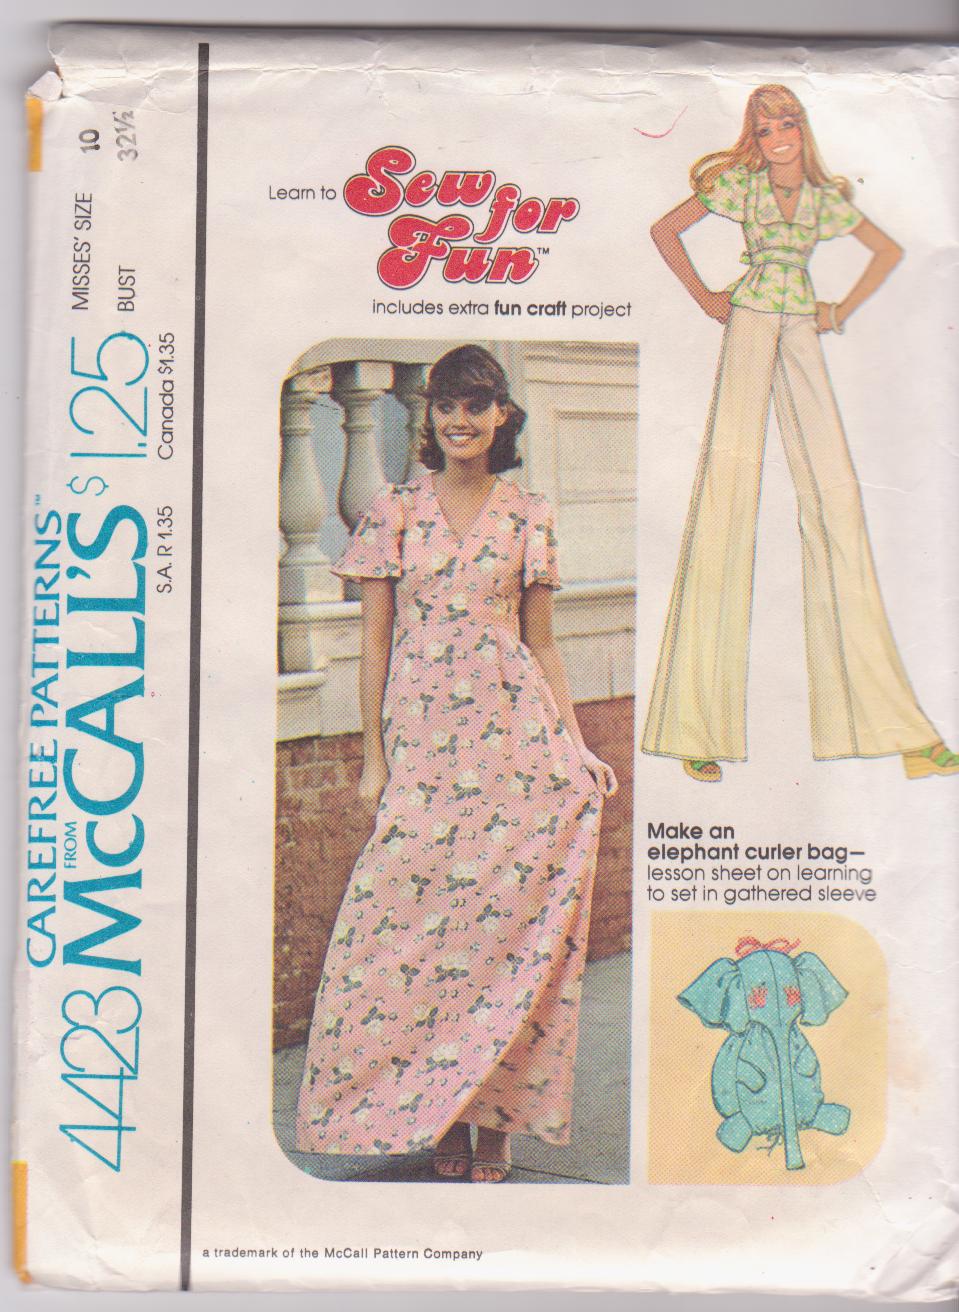 McCall's Patterns, Sewing And Craft Patterns